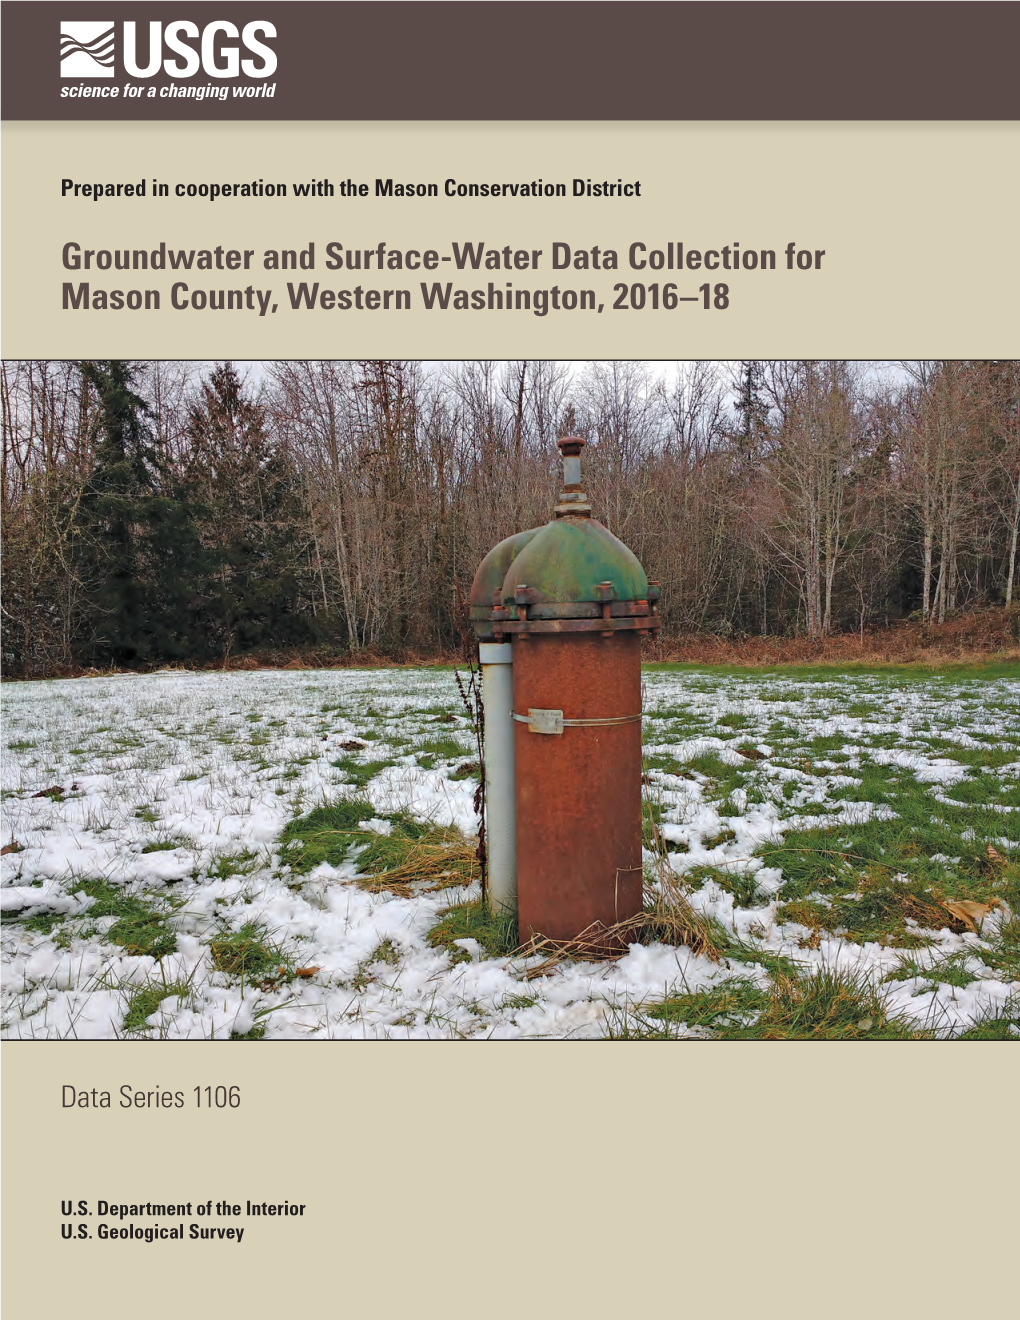 Groundwater and Surface-Water Data Collection for Mason County, Western Washington, 2016–18 — DS 1106